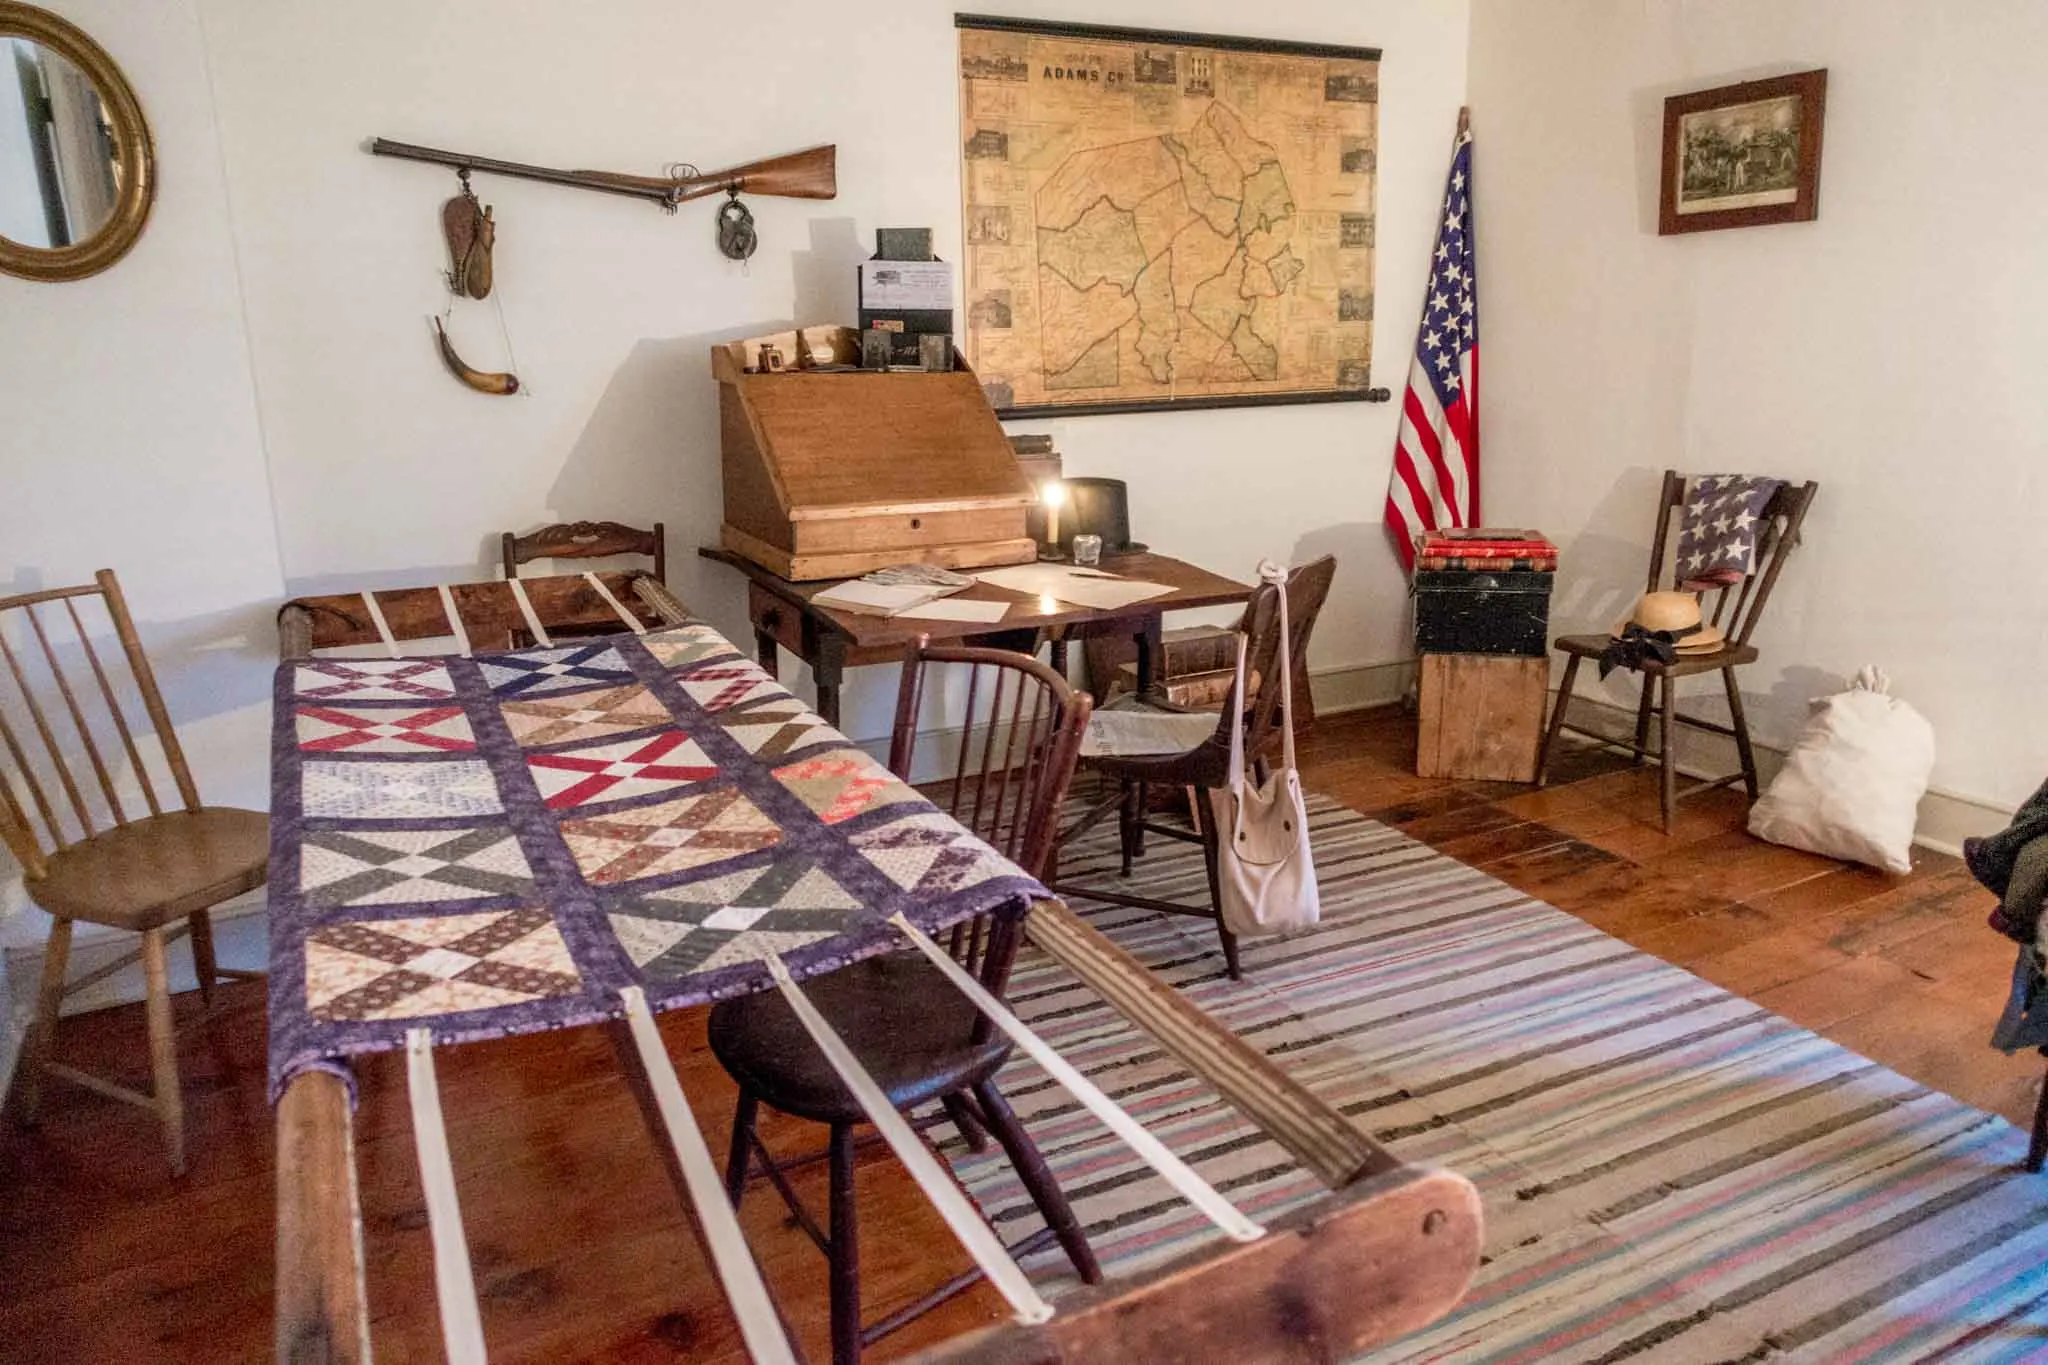 Civil War-era quilting room with desk and map 